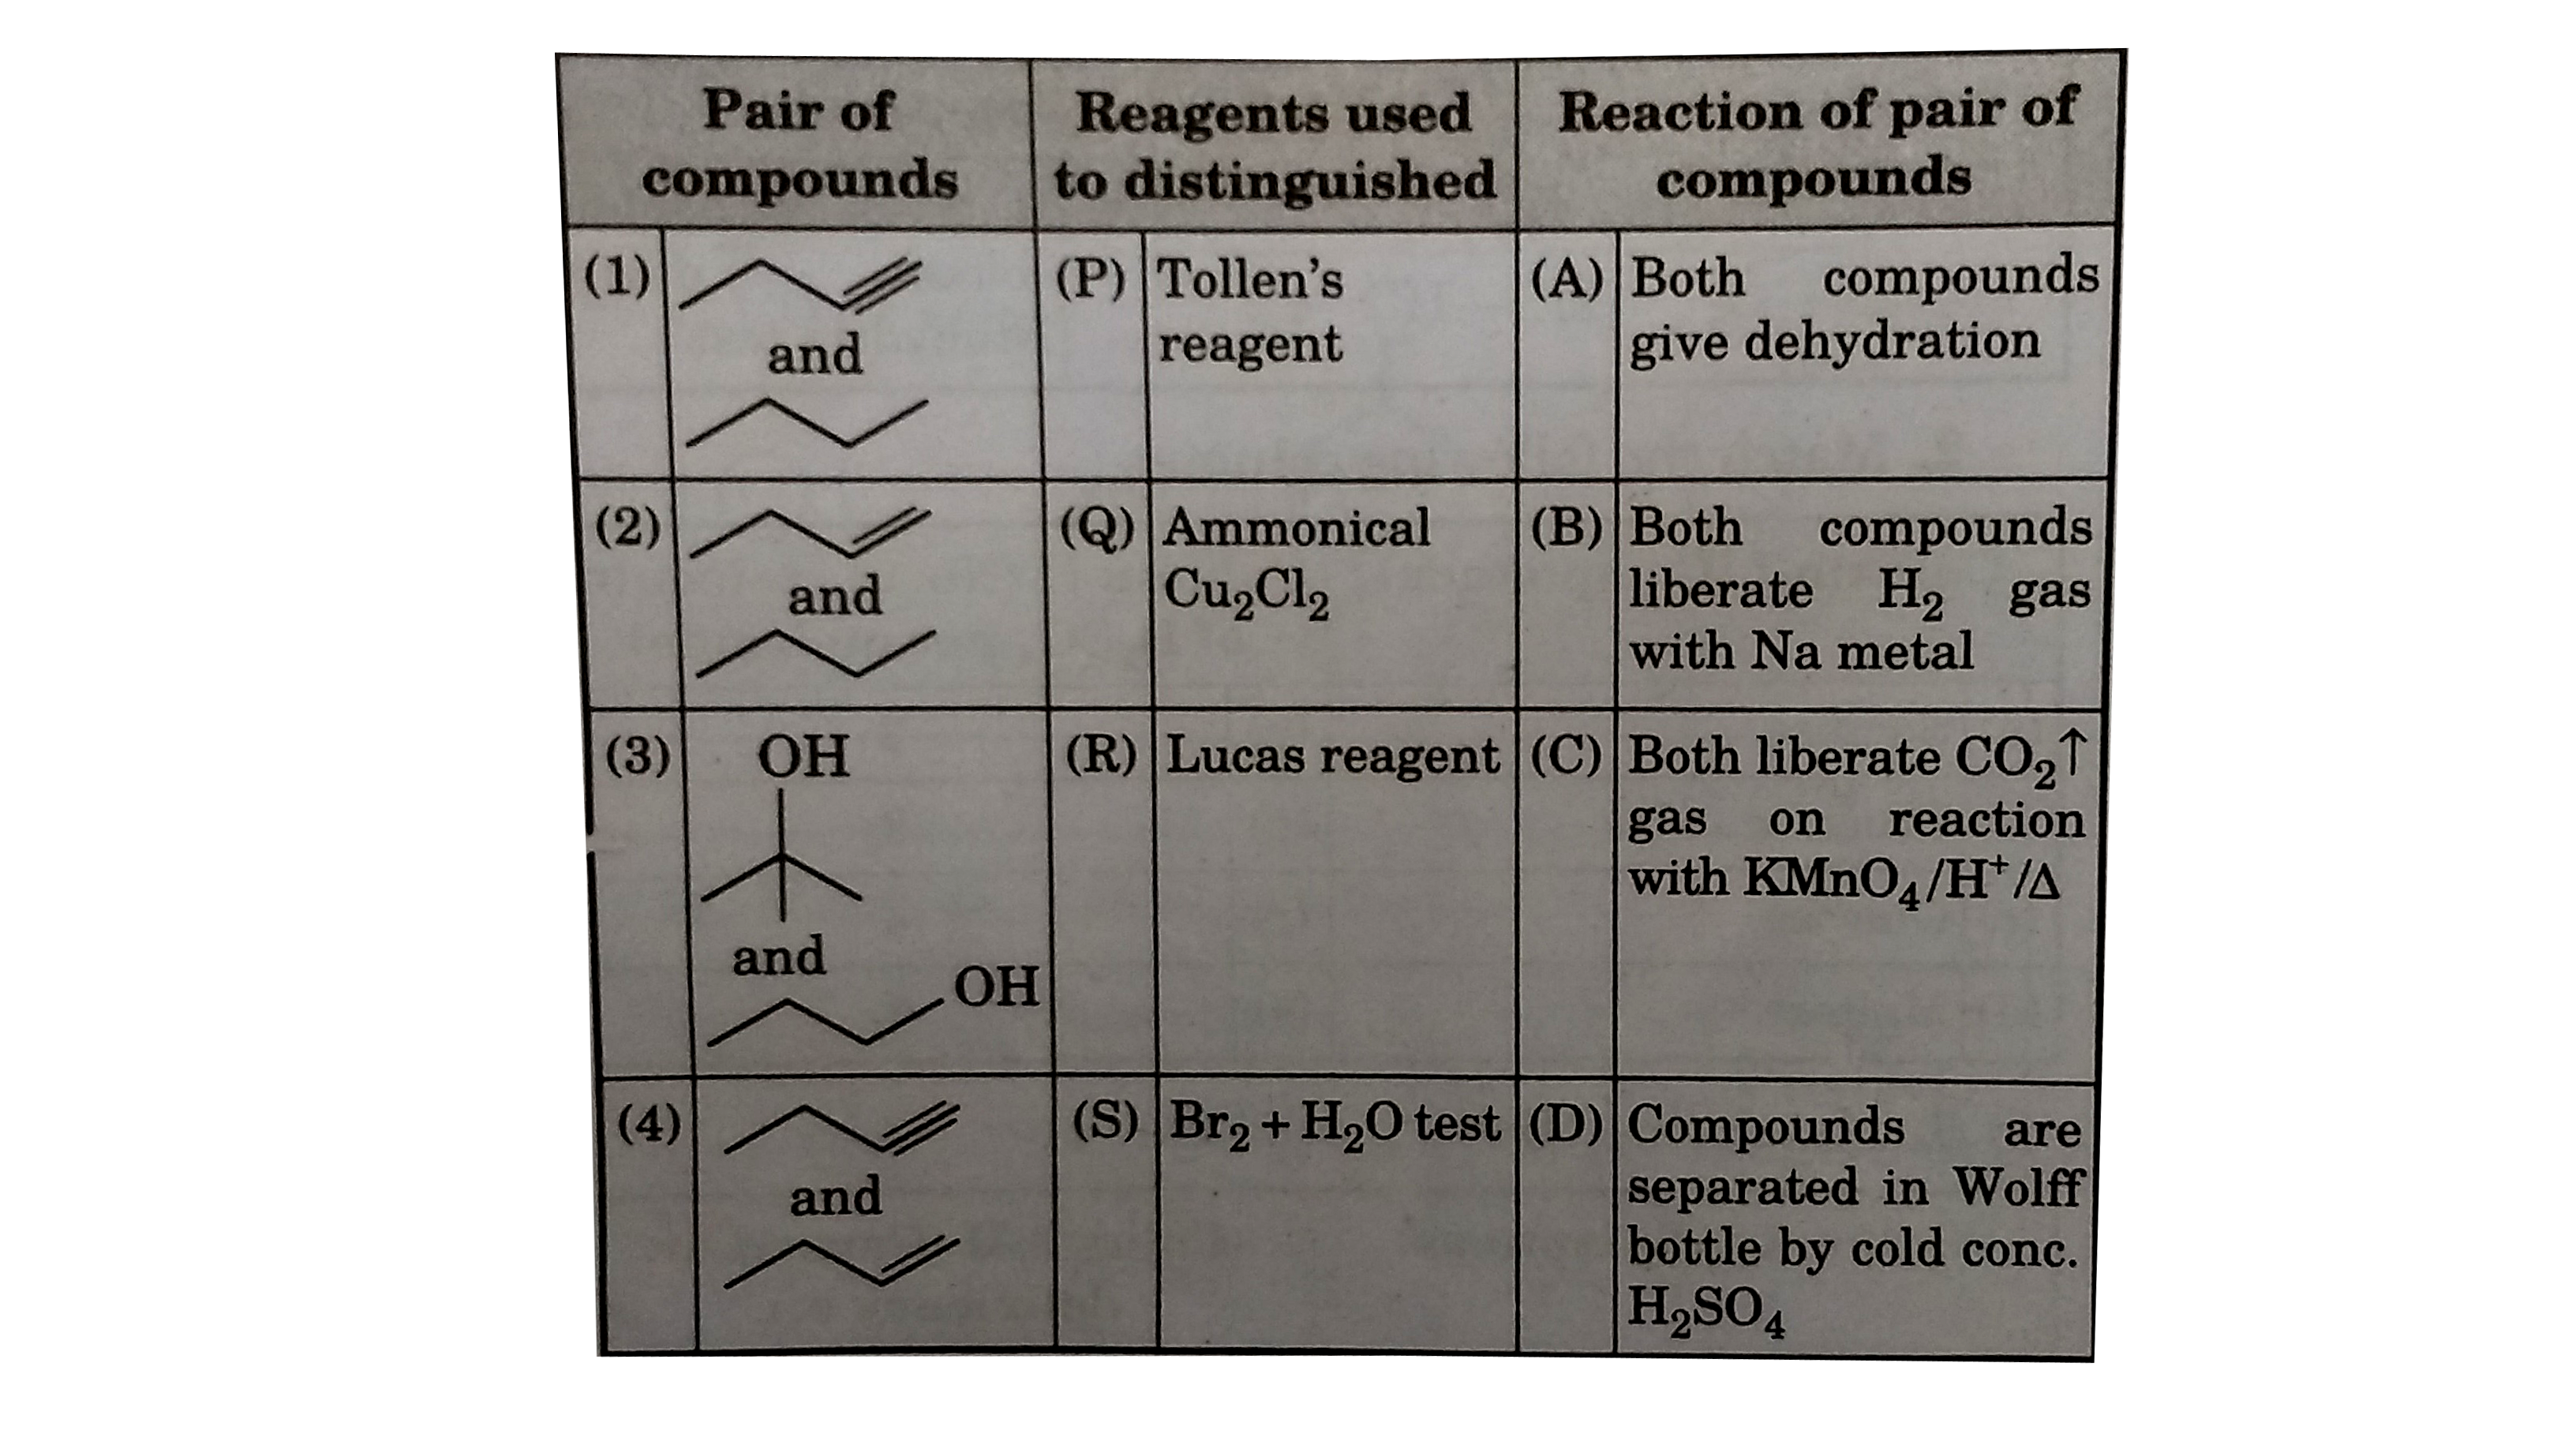 Identify correct set for 2nd pair of compounds ?